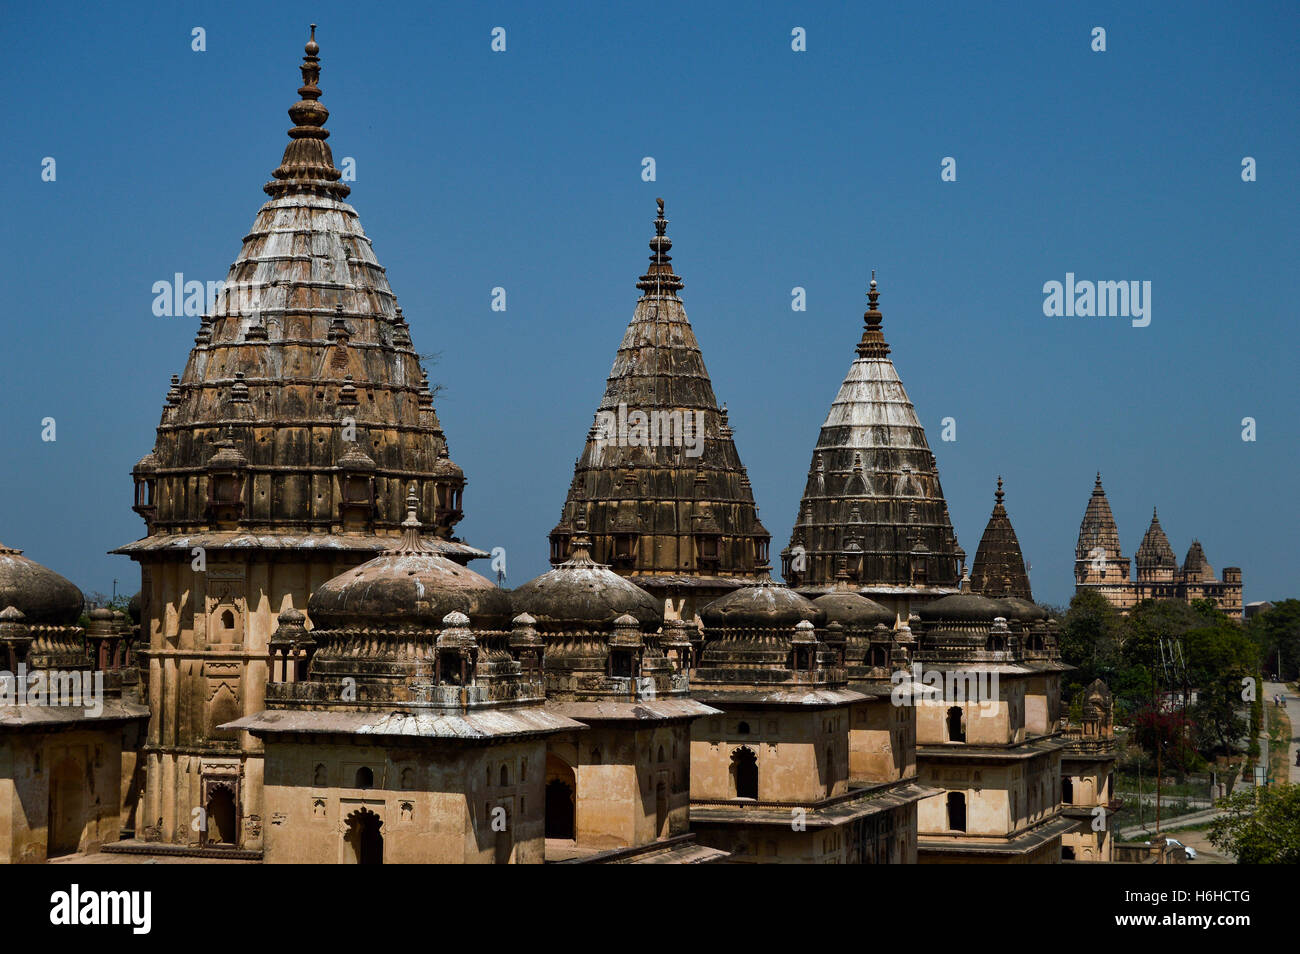 The cenotaphs in Orchha. Orchha (or Urchha) is a town in Tikamgarh district of Madhya Pradesh state, India. The town was establi Stock Photo